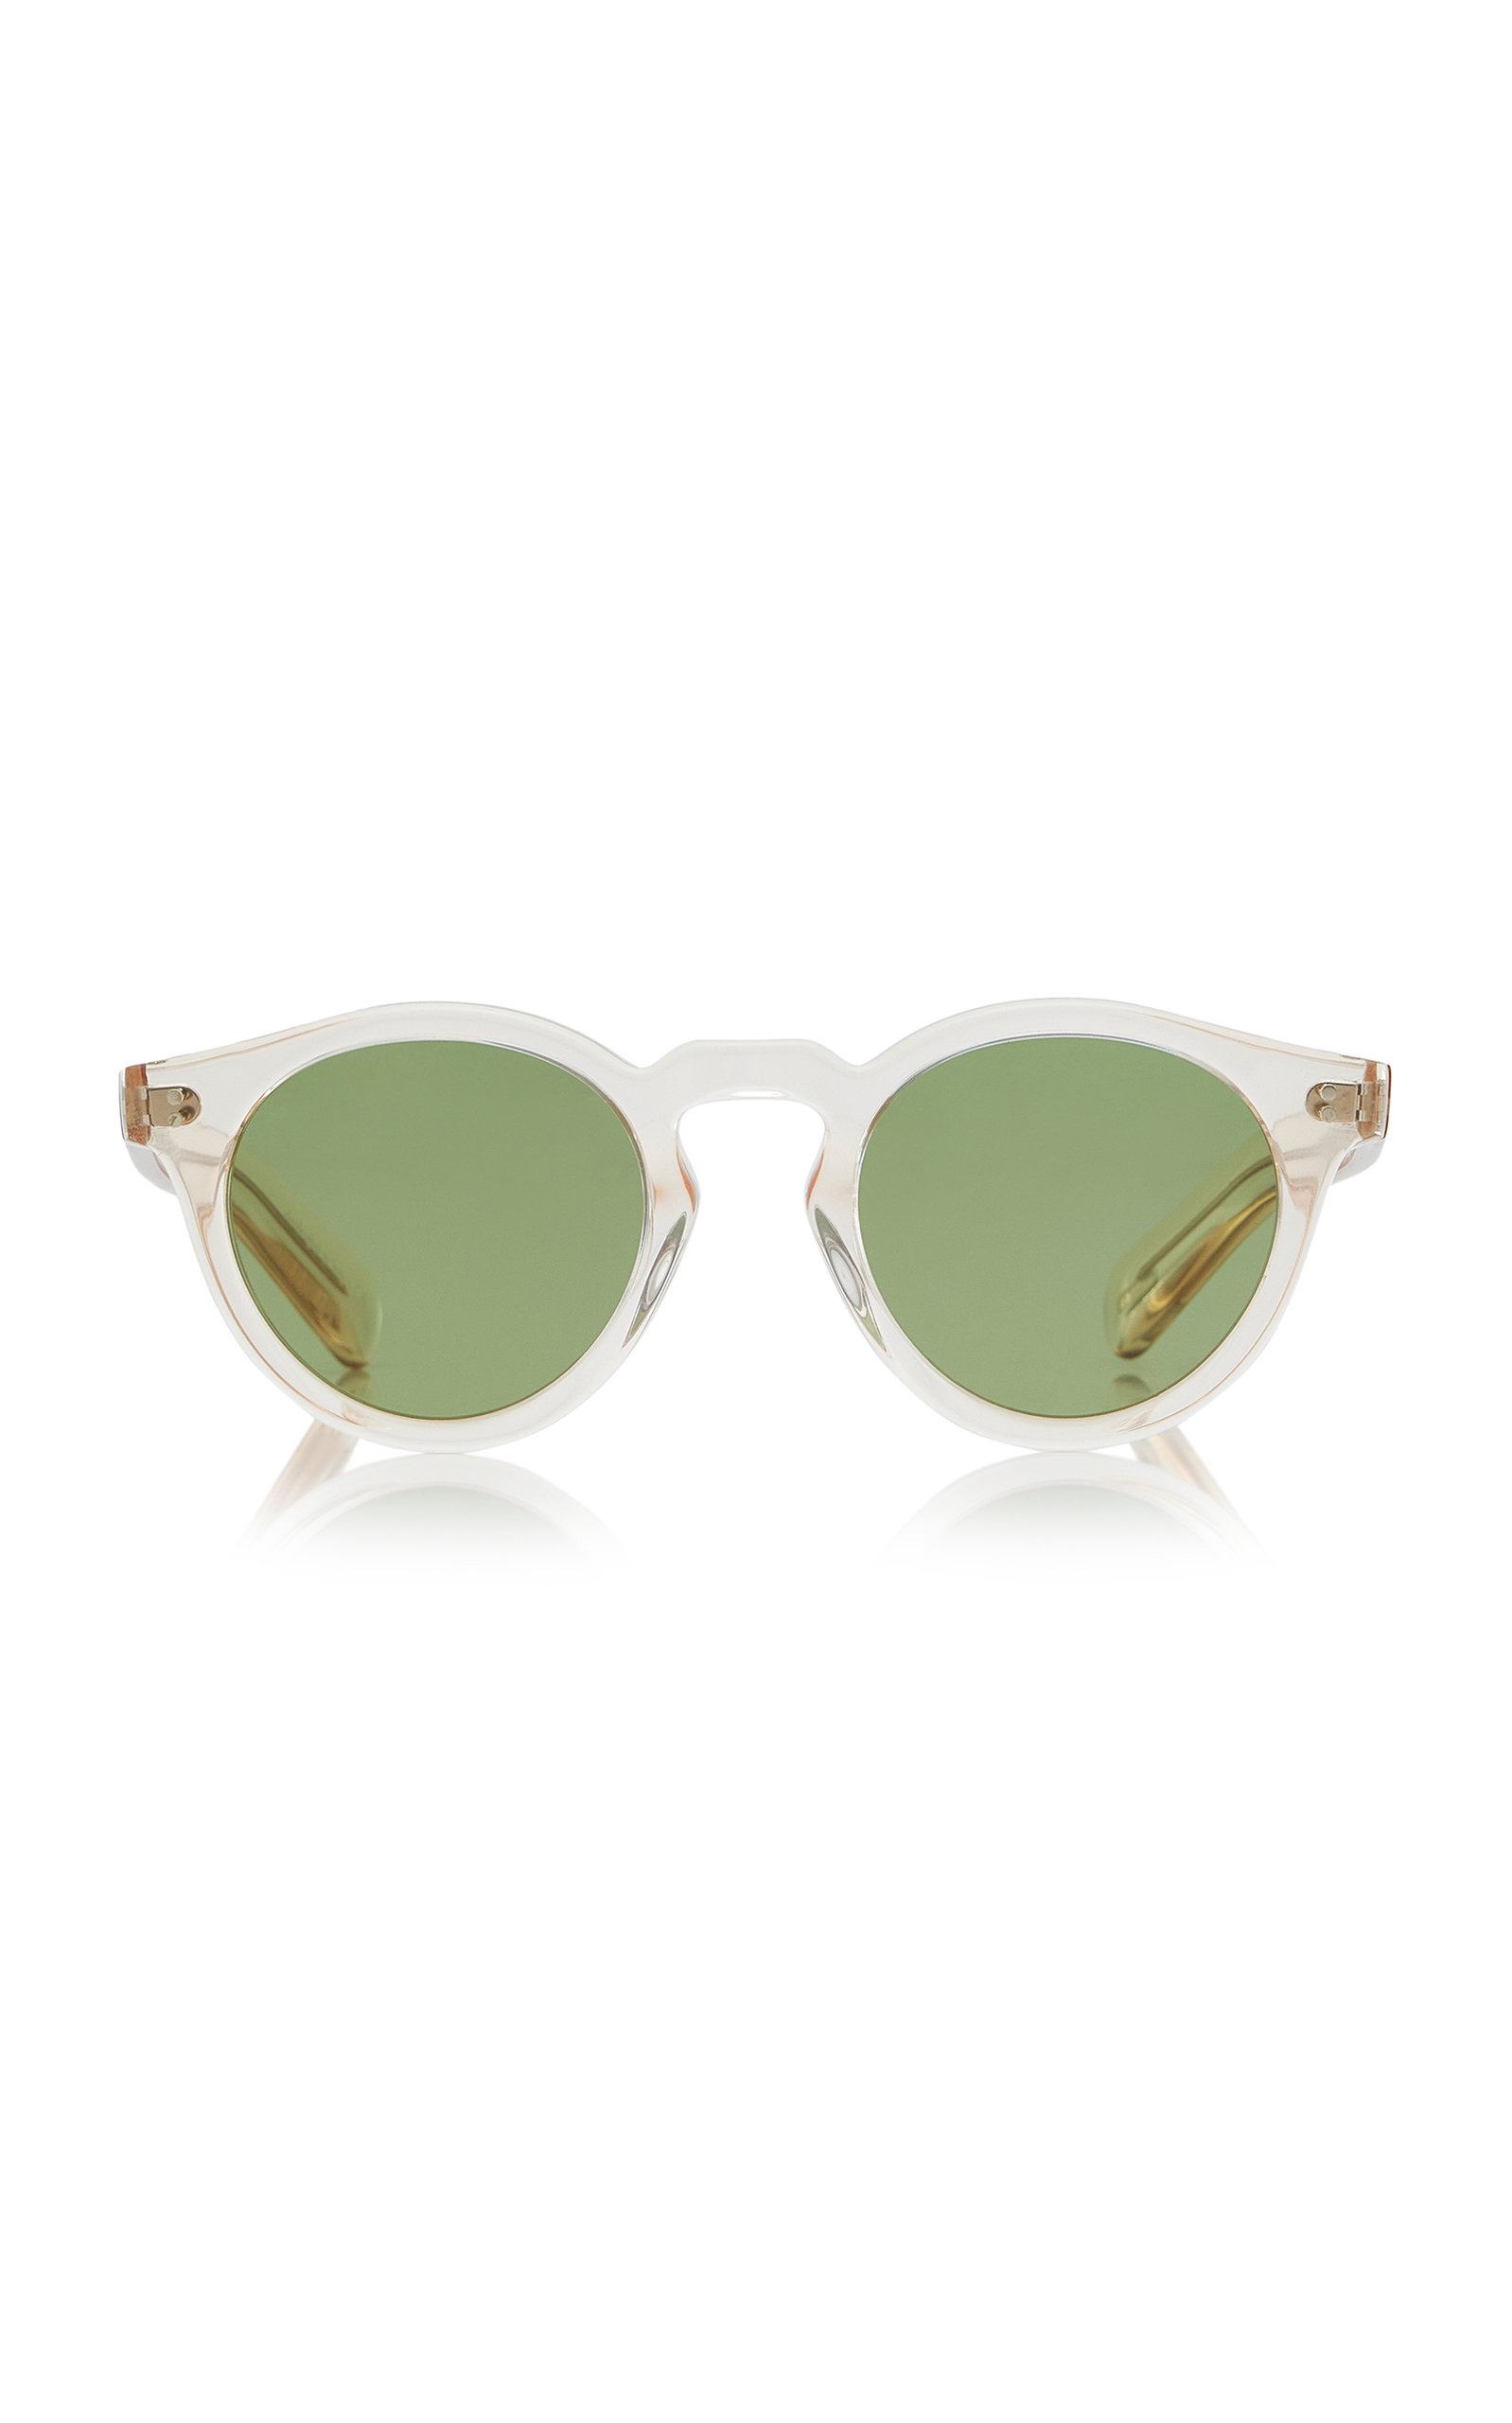 OLIVER PEOPLES WOMEN'S MARTINEAUX ROUND-FRAME ACETATE SUNGLASSES